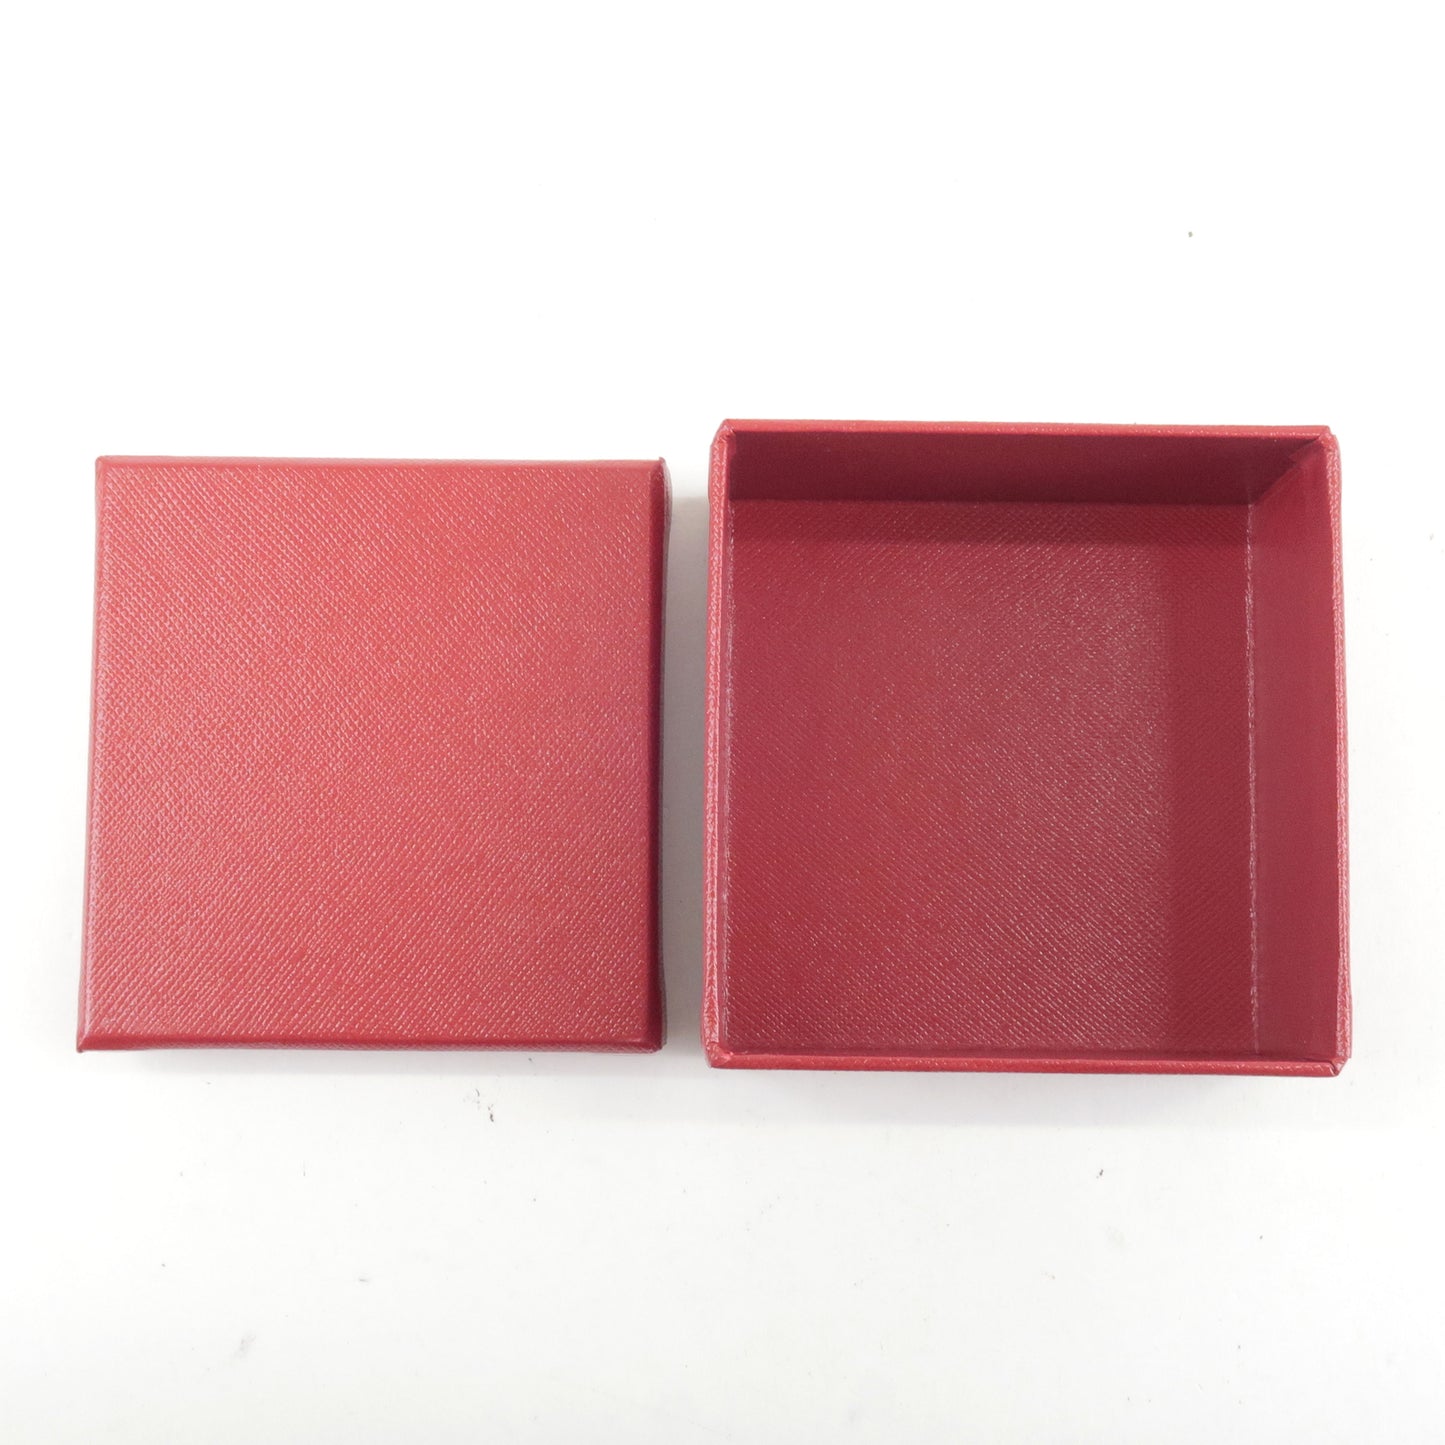 Cartier Set of 2 Ring Display Box Jewelry Box For Ring Red